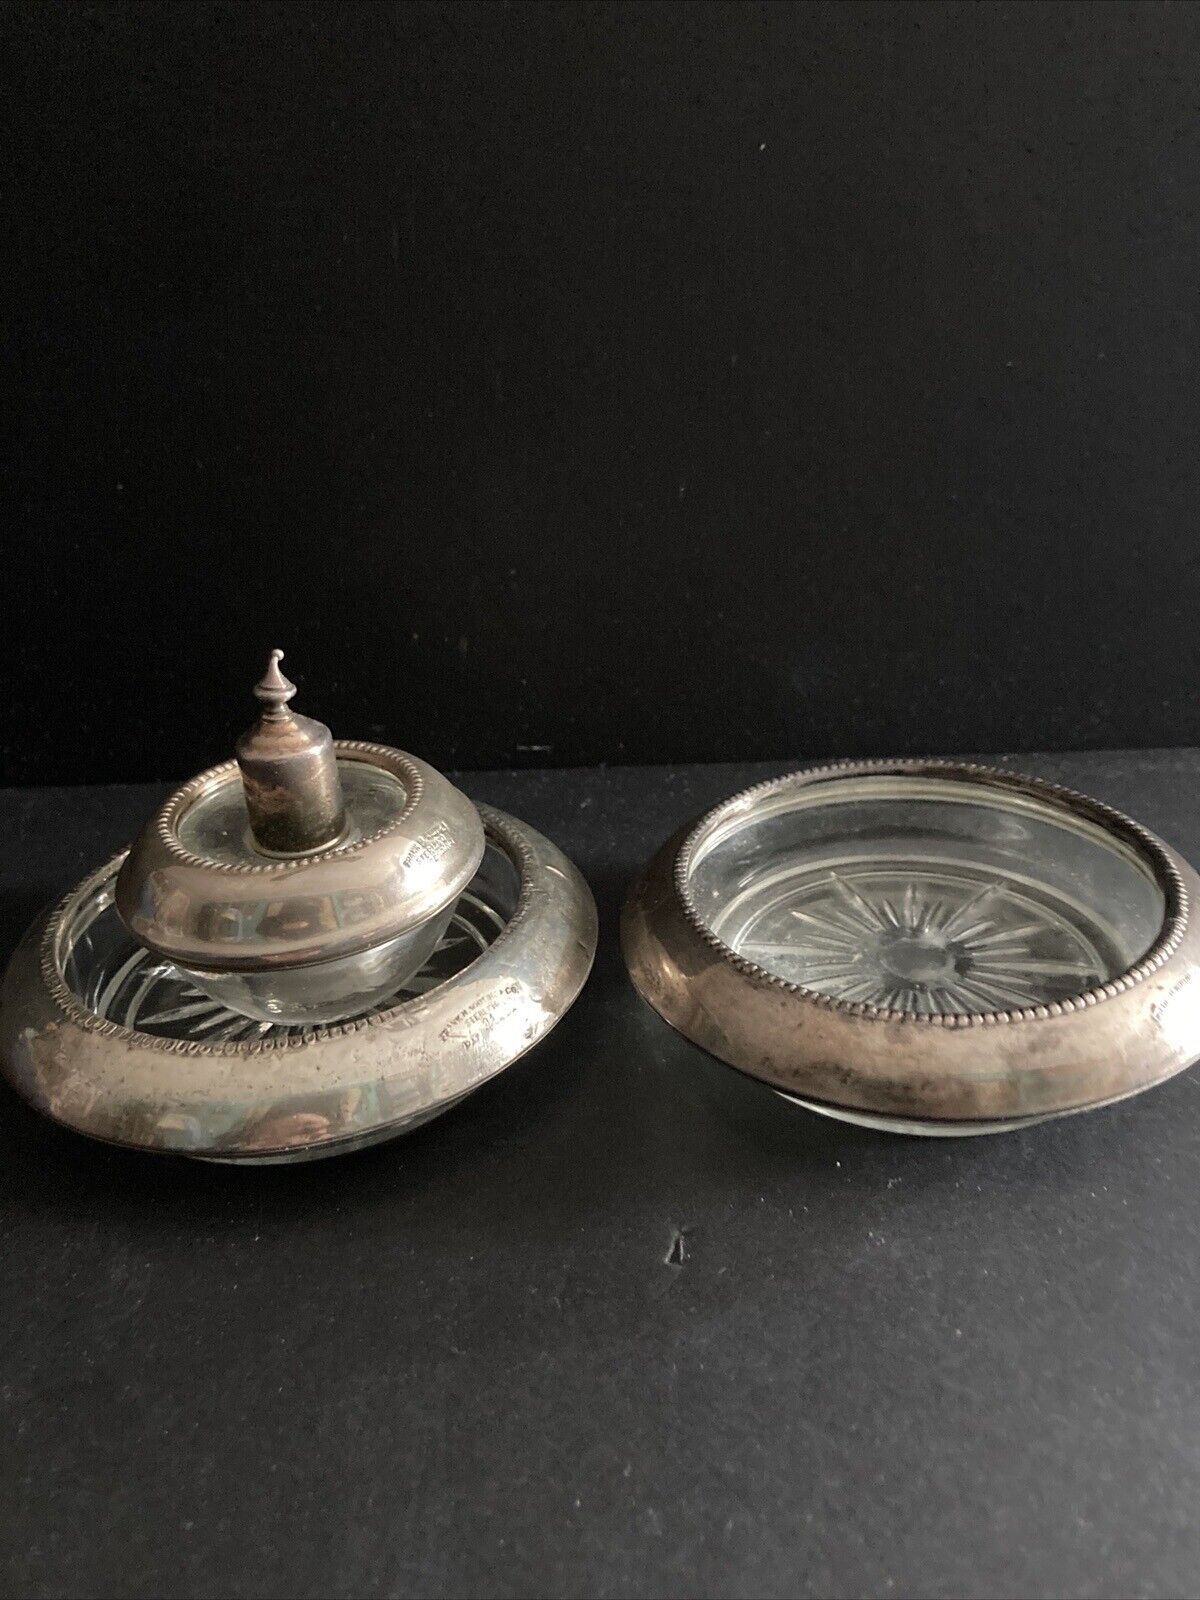 FRANK M. WHITING STERLING SILVER & GLASS HY GLO TABLE LIGHTER & ASH TRAYS (2)